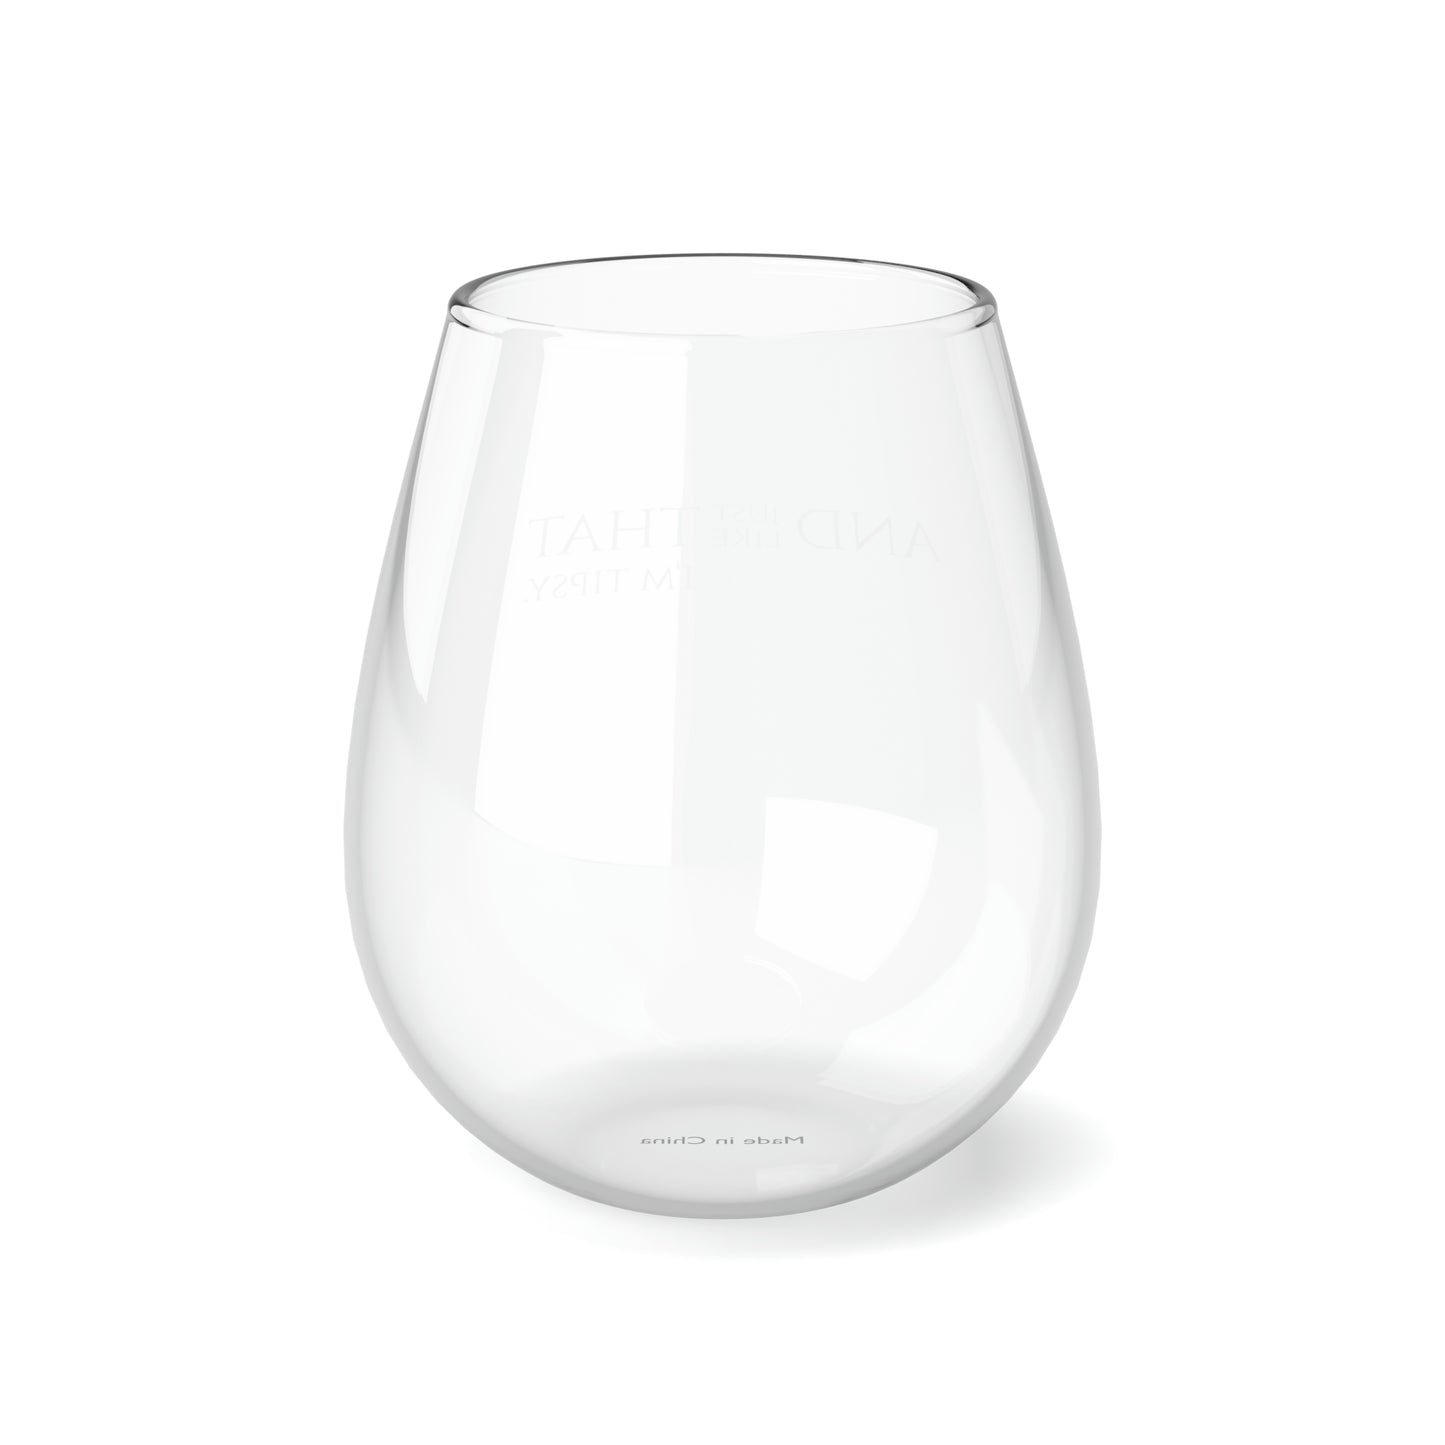 Sip Happens Collection- I'm Tipsy Stemless Wine Glass, 11.75oz